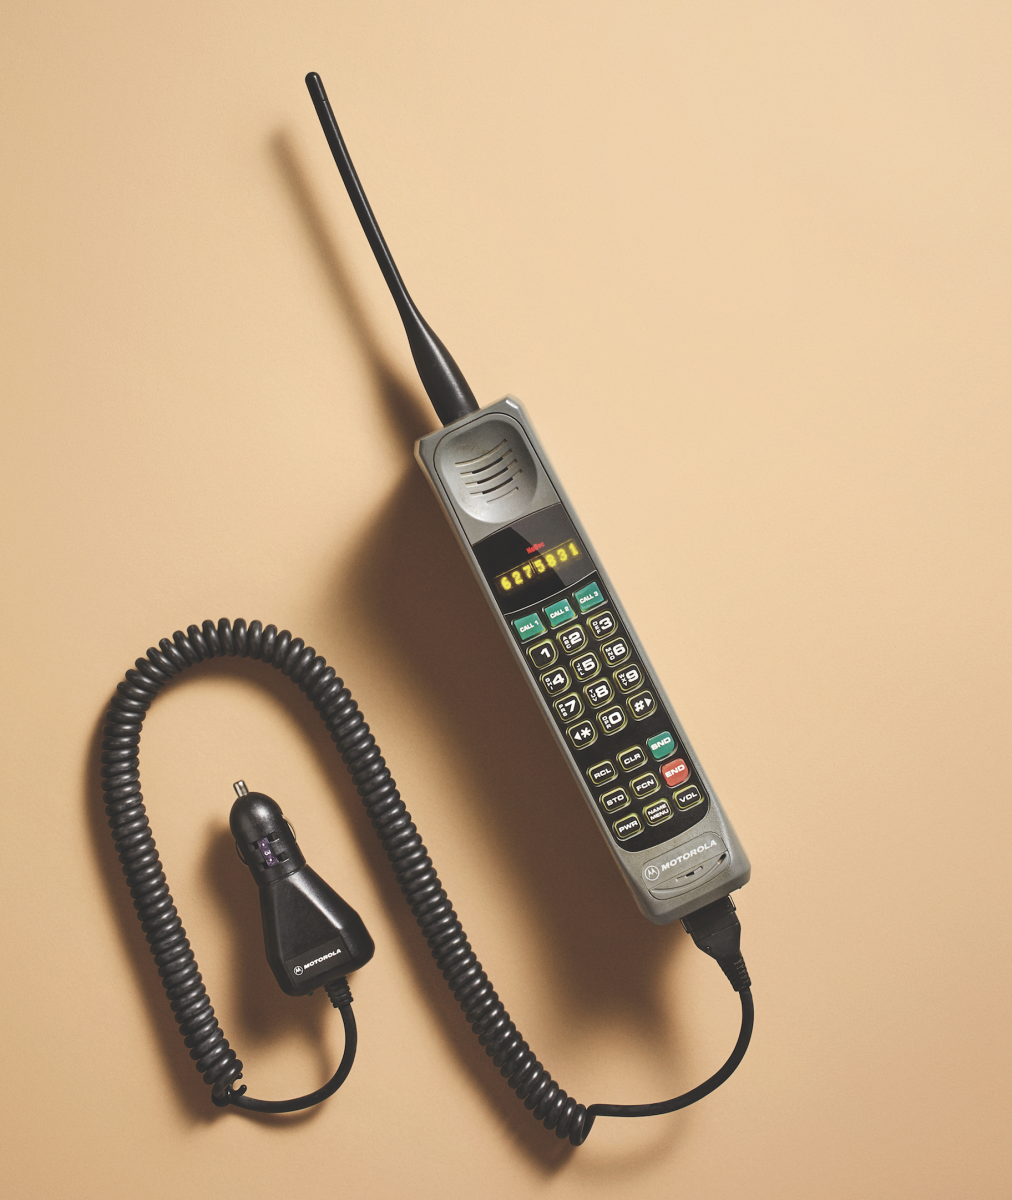 An old Motorola cell phone.